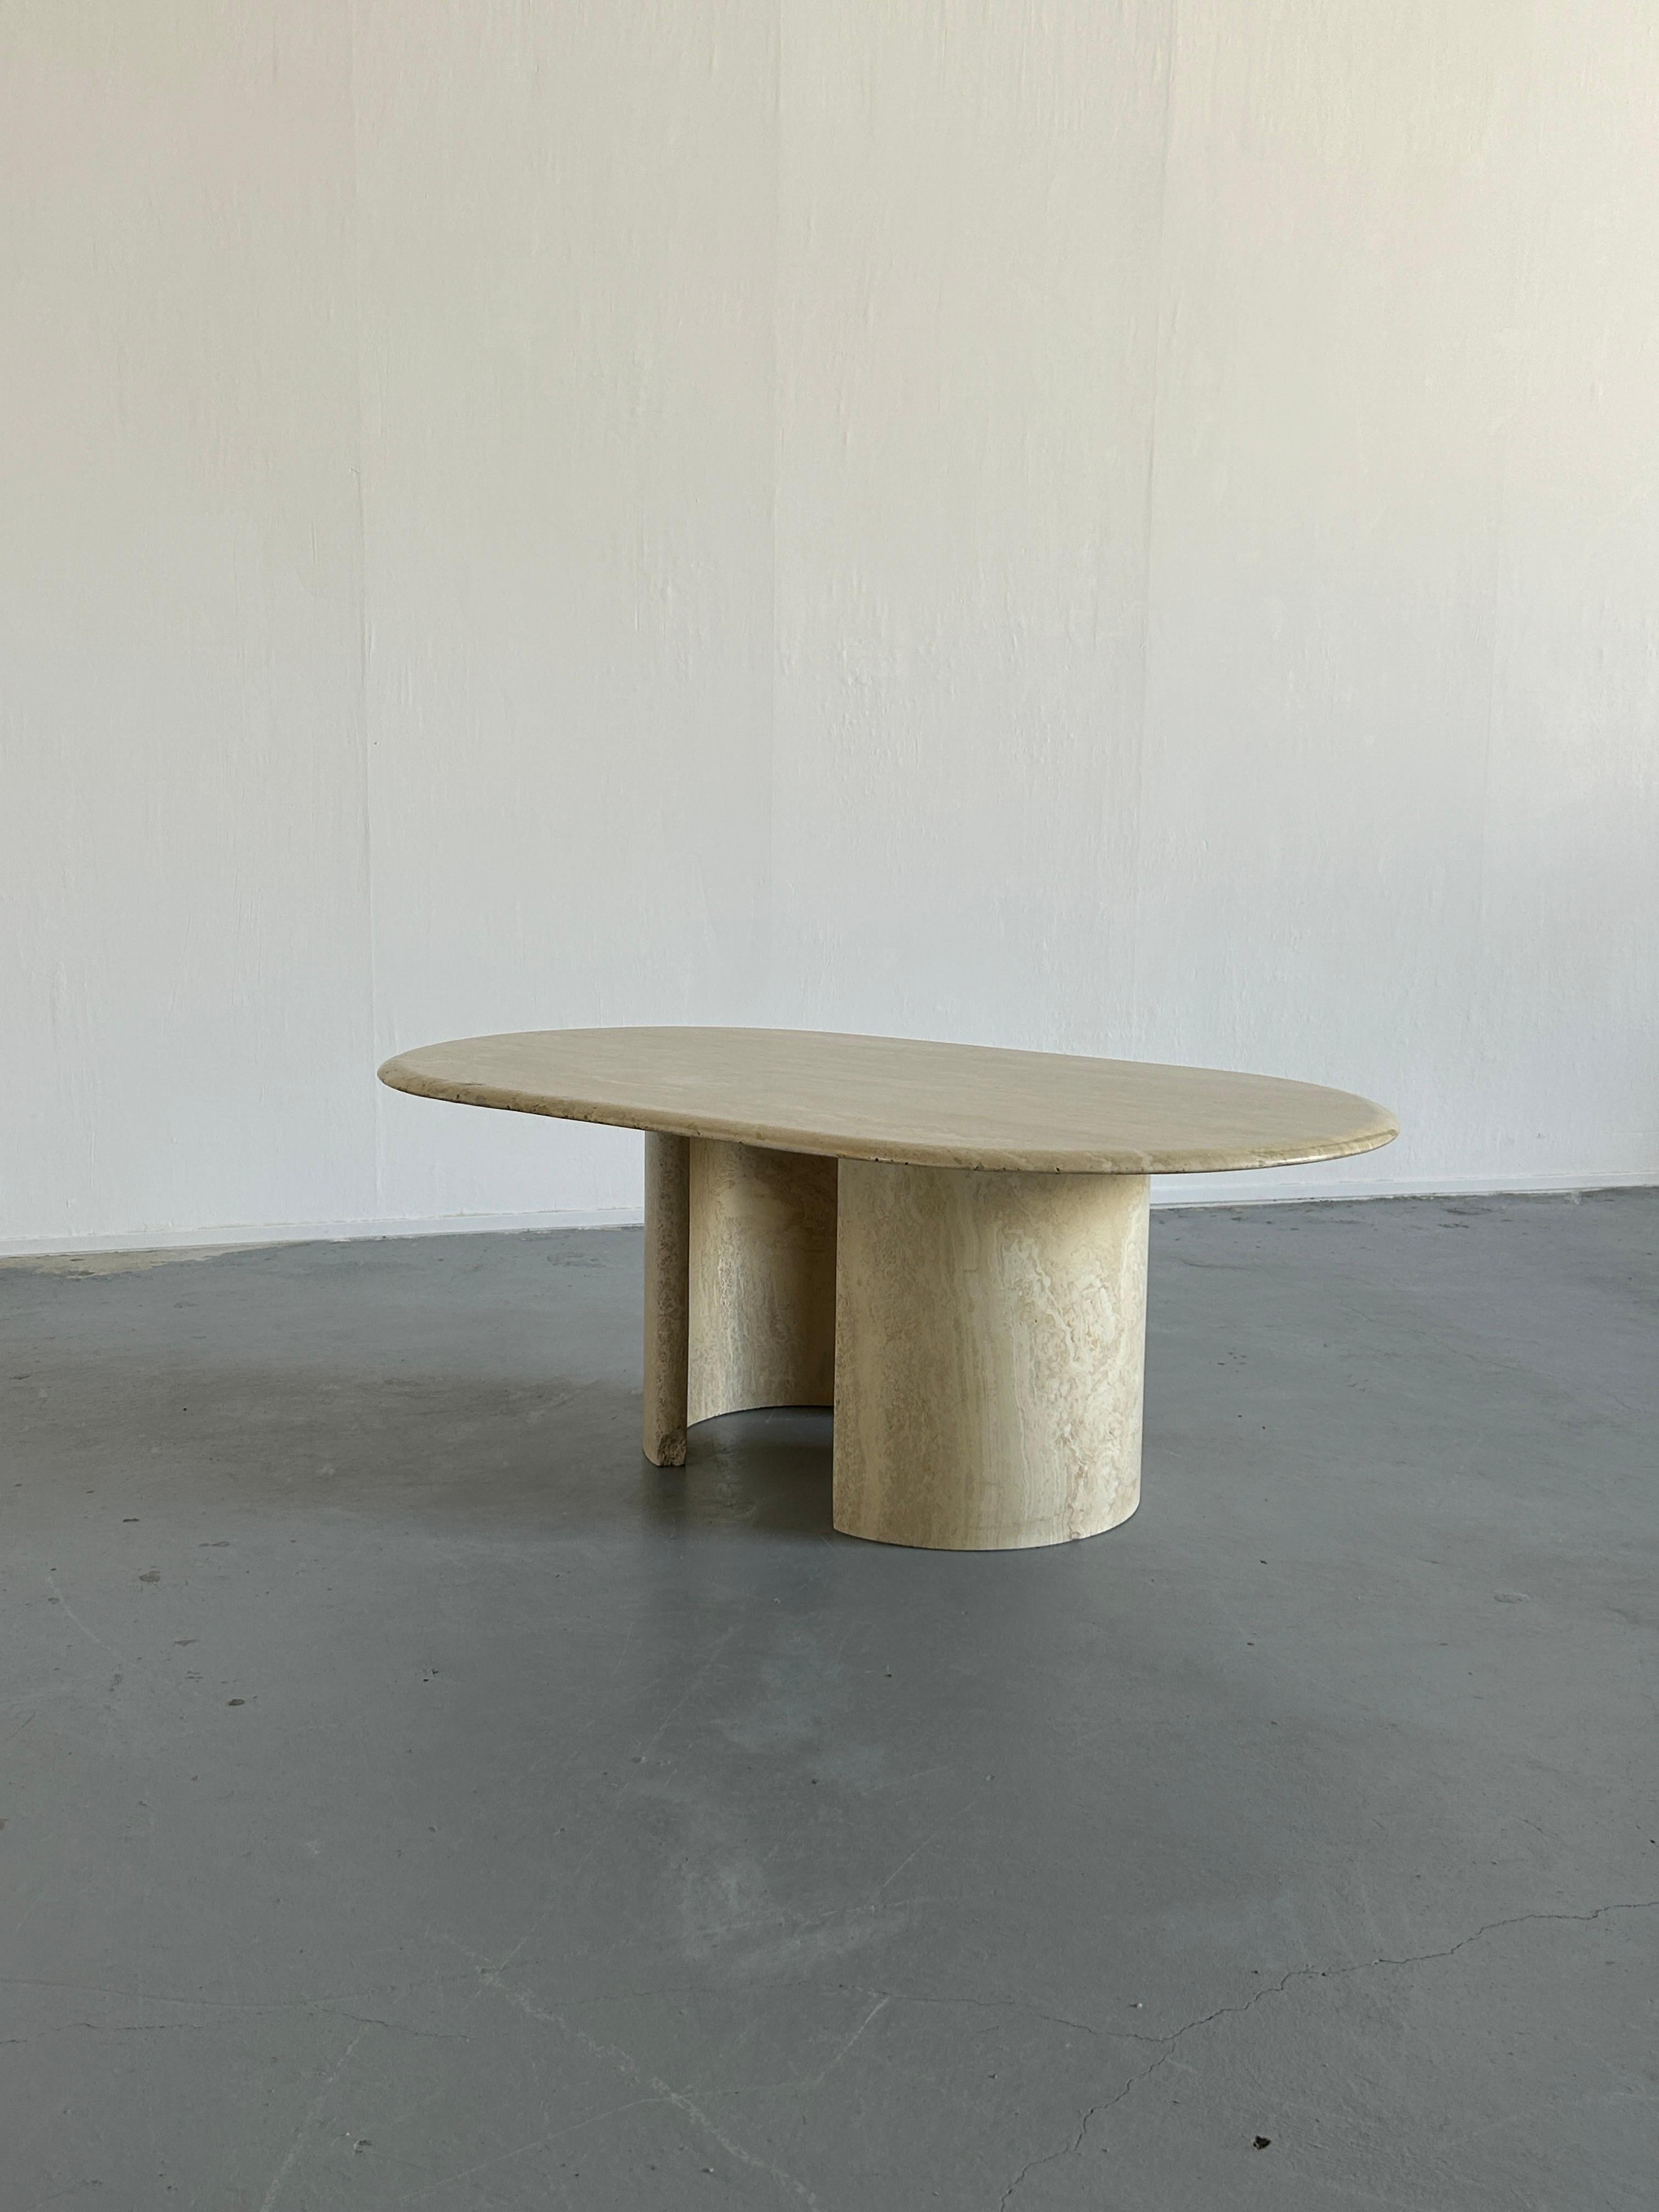 A beautiful original 1980s Italian travertine coffee table. 

Consists of a large and beautiful marble top with rounded edges and two independent semi-circle legs which can be adjusted per wish.
All parts made from full travertine stone of